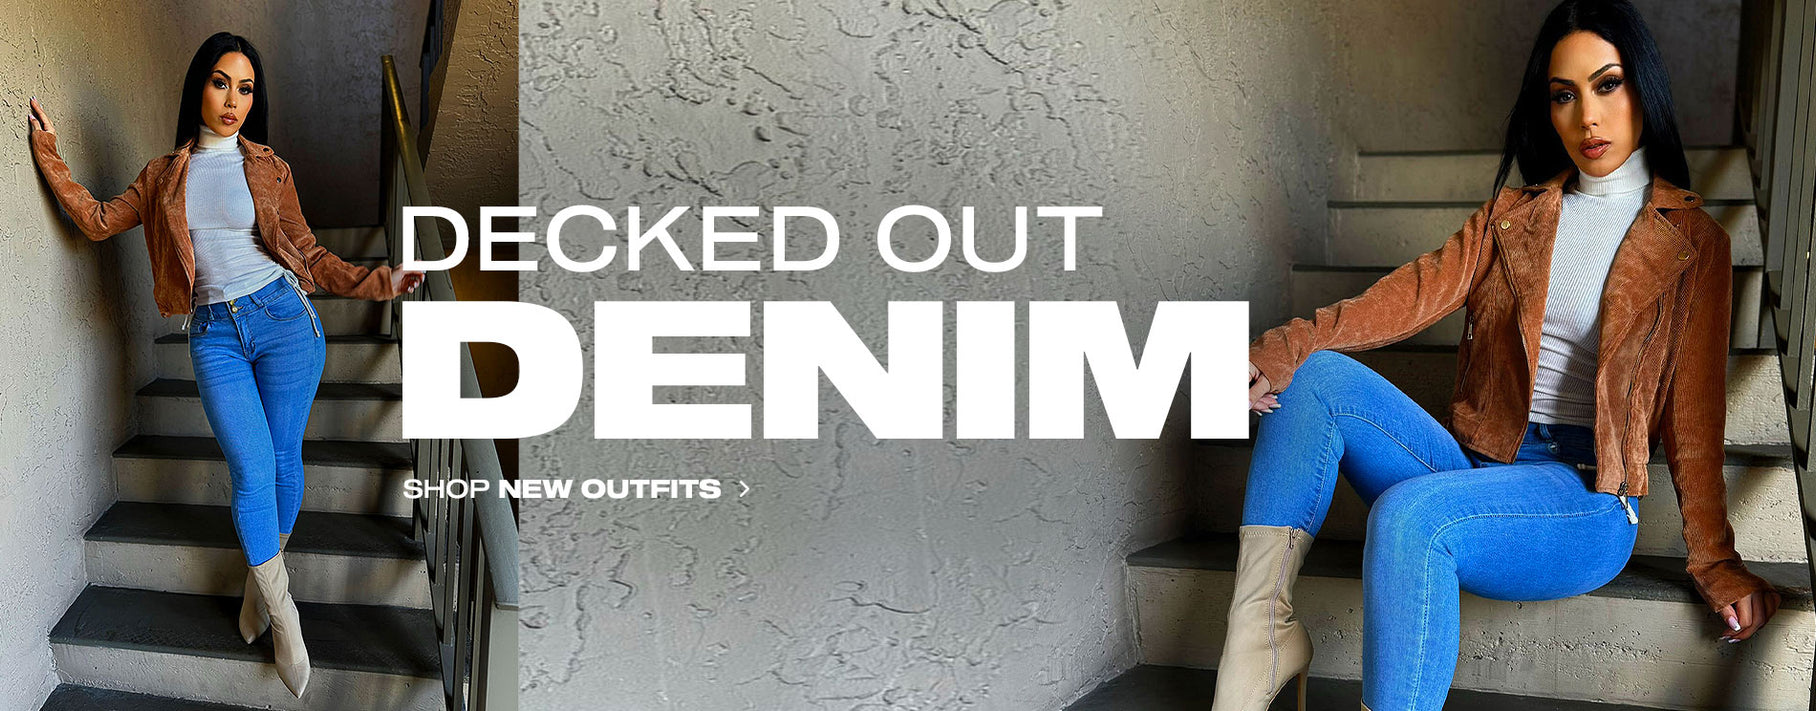 Decked Out Denim: Shop New Outfits